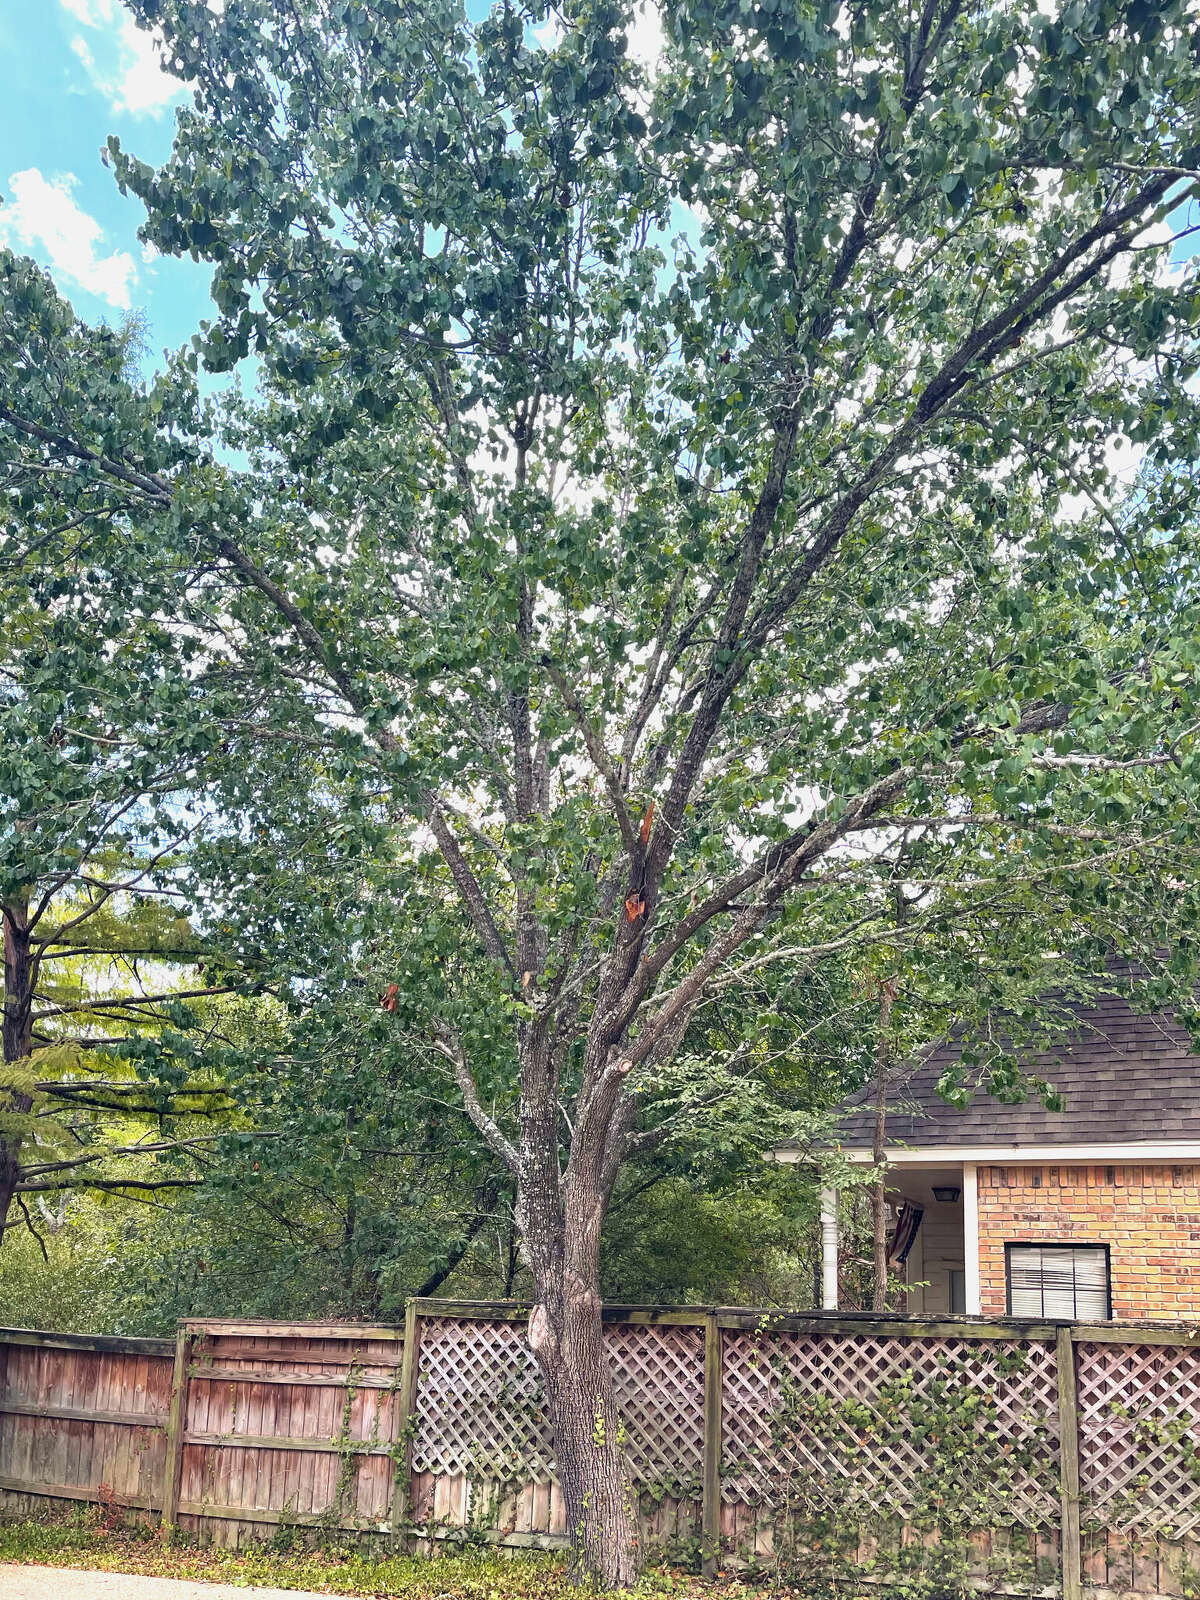 It's past time for a Bradford pear tree that already has lost two branches to come down.